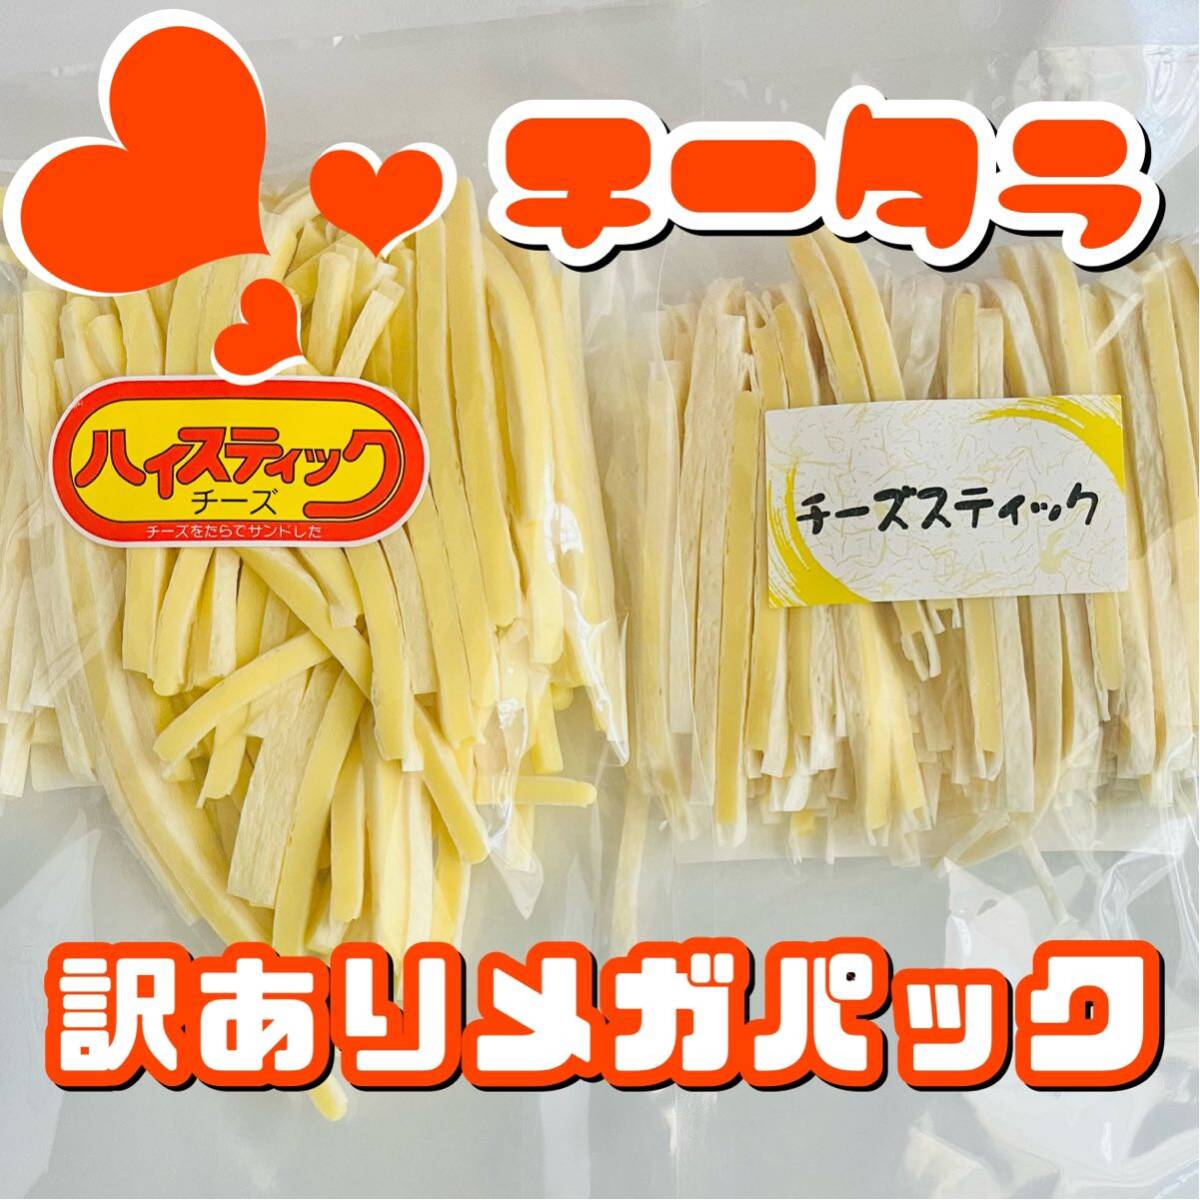  economical! with translation cheese .. high stick cheese & cheese stick total 580g